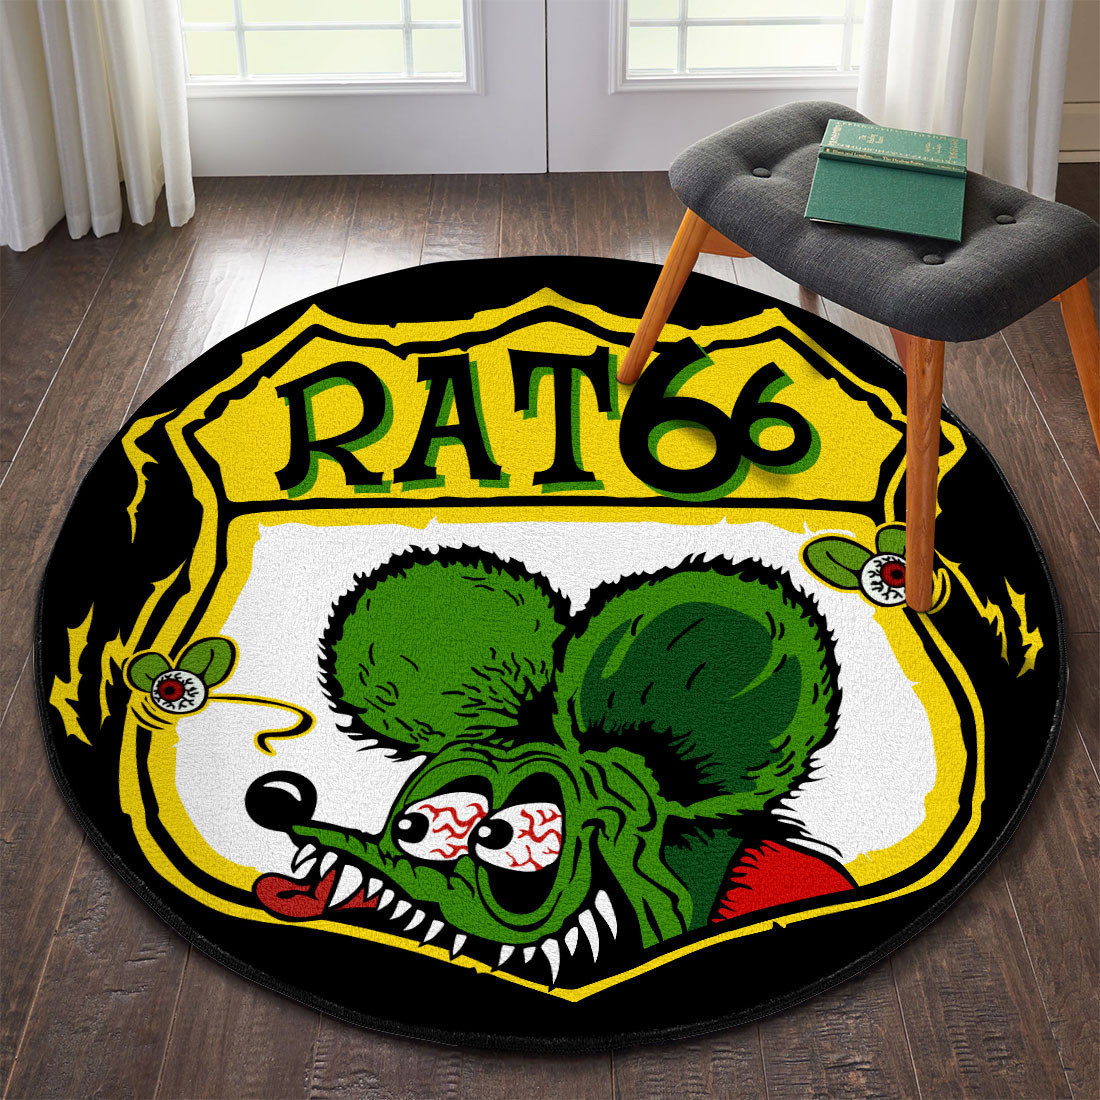 Rat 66 Hot Rod Round Mat Round Floor Mat Room Rugs Carpet Outdoor Rug Washable Rugs S (24In)